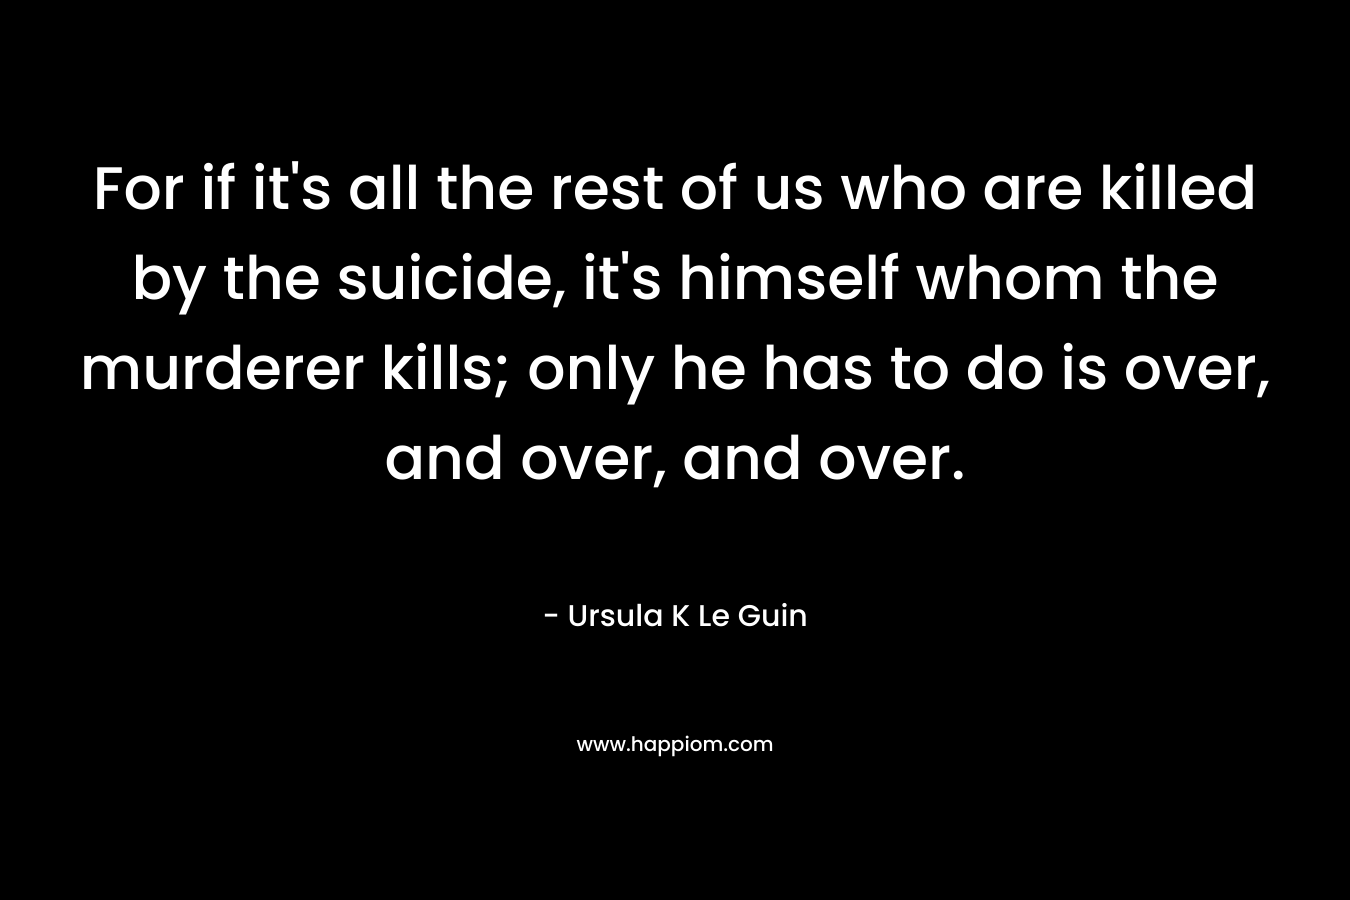 For if it’s all the rest of us who are killed by the suicide, it’s himself whom the murderer kills; only he has to do is over, and over, and over. – Ursula K Le Guin